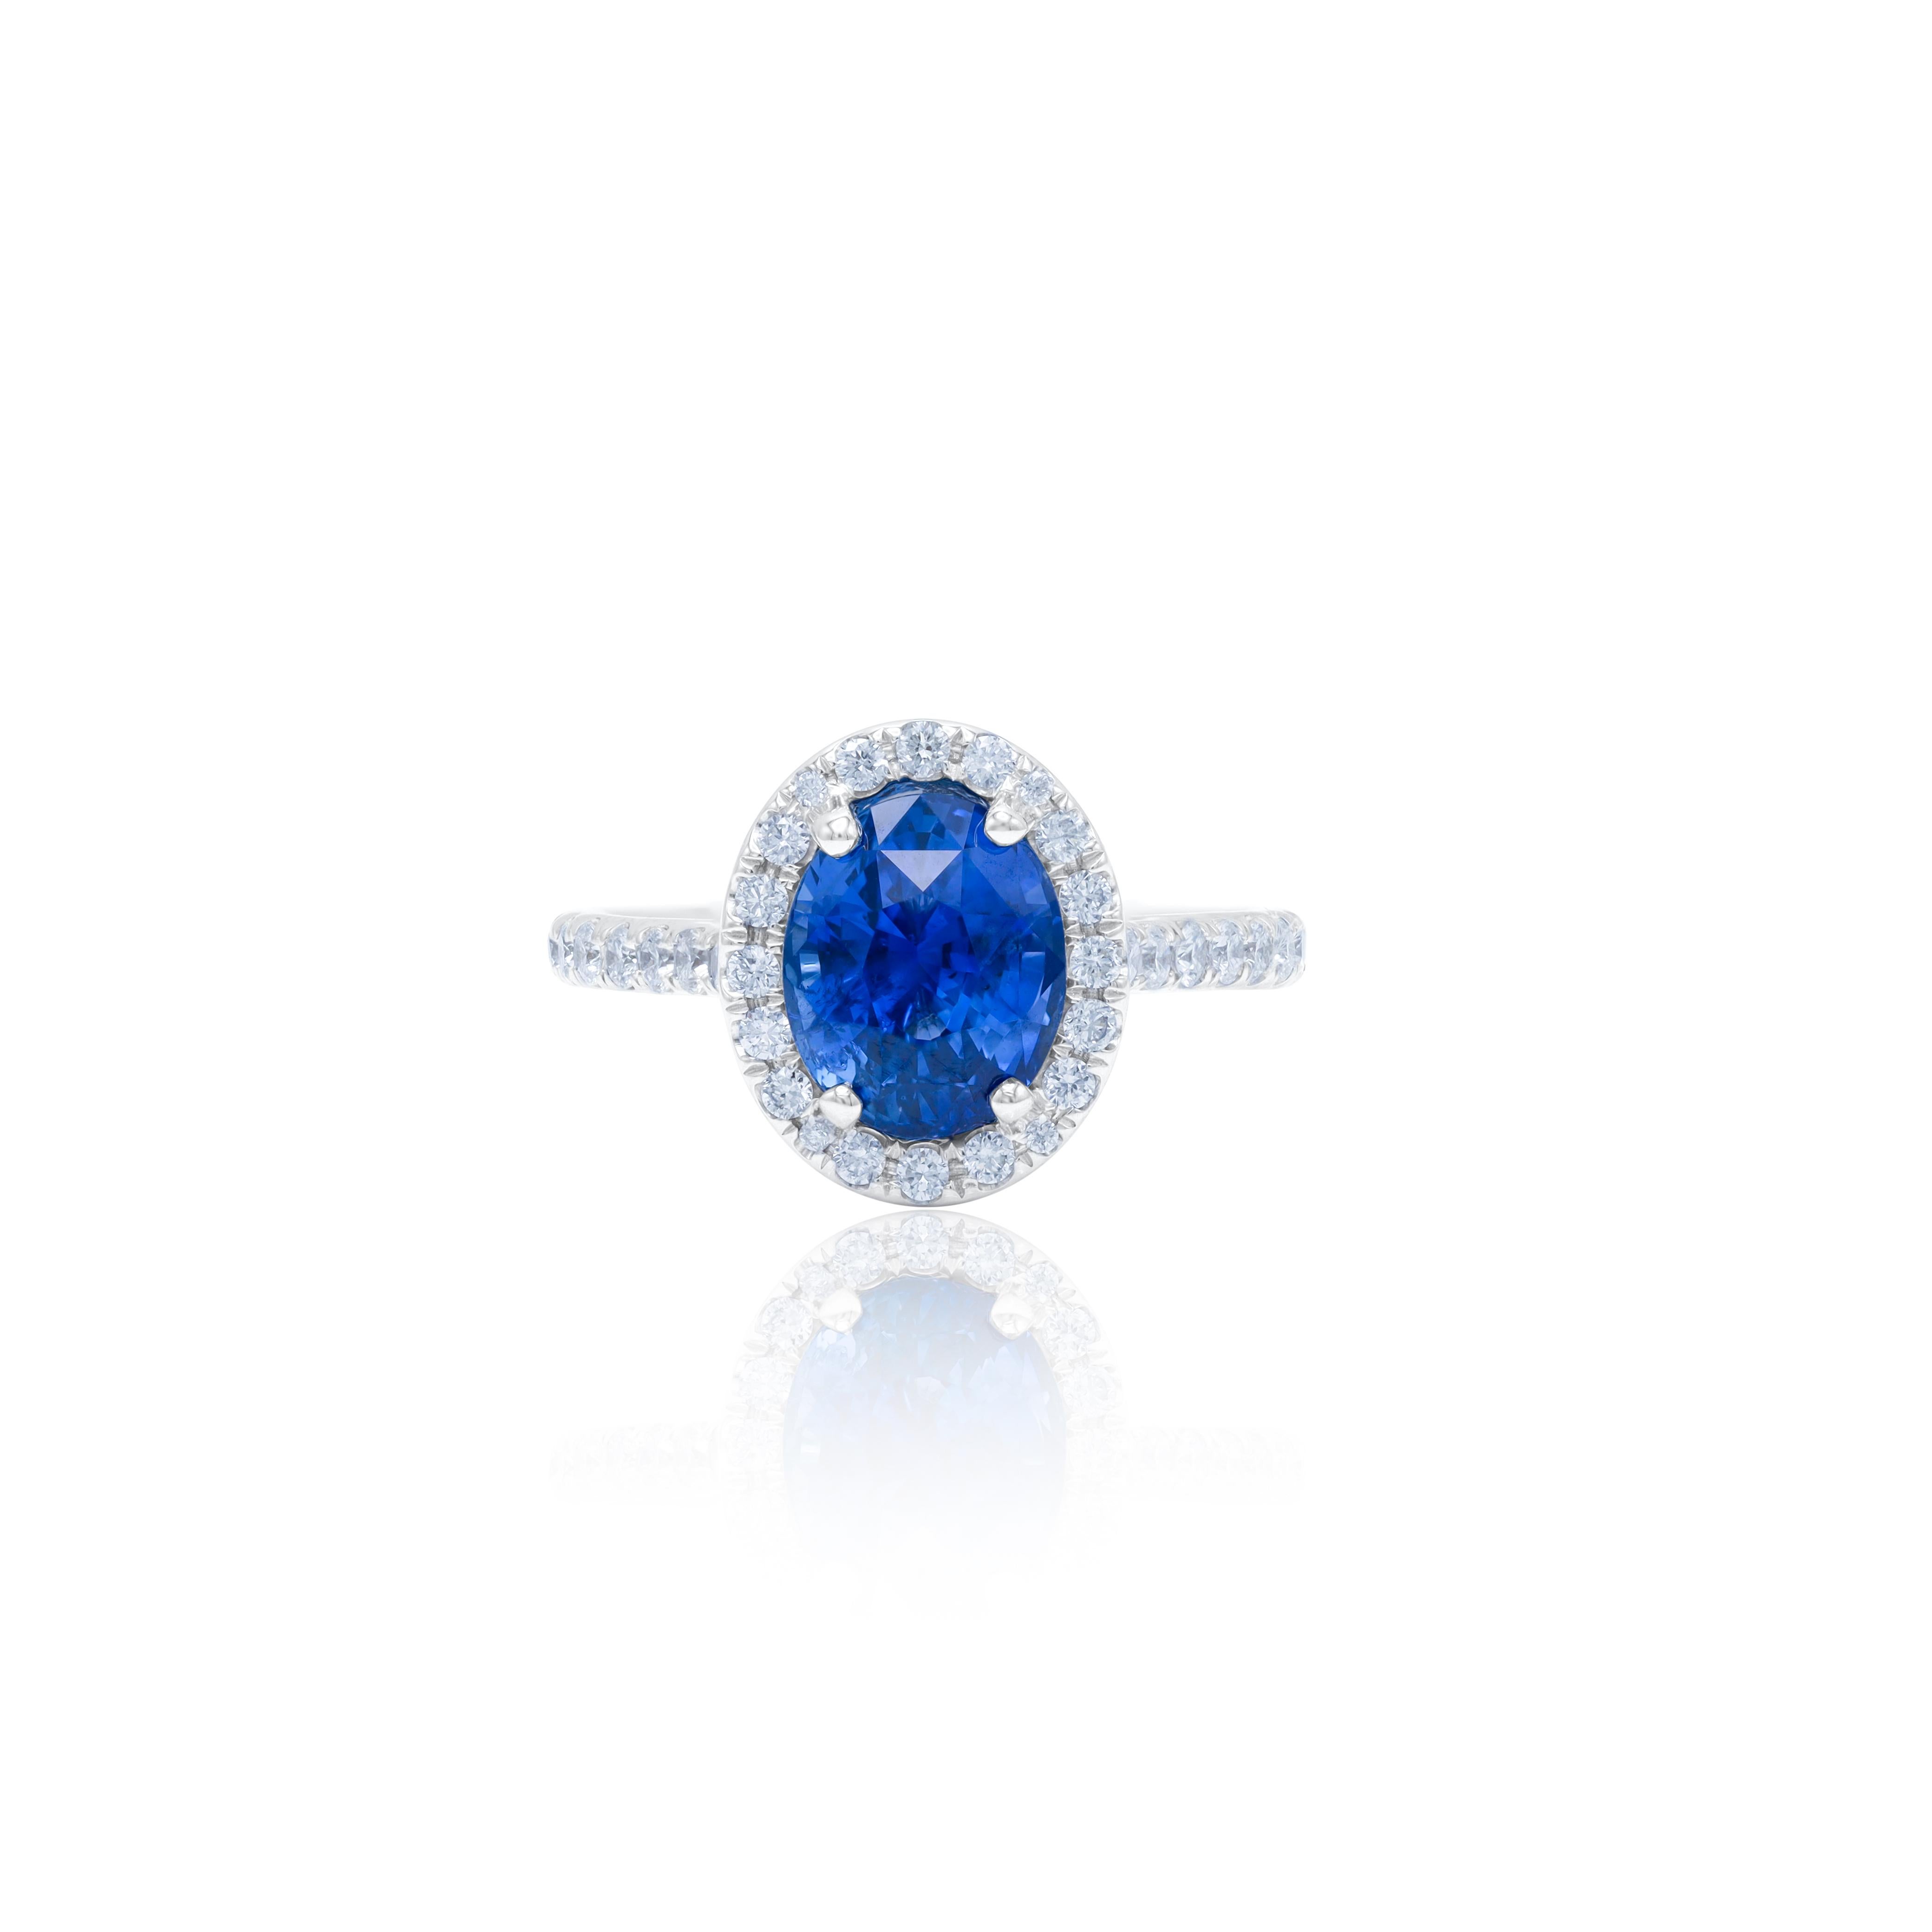 18 kt white gold sapphire diamond ring featuring a 3.26 ct C.Dunaigre certified oval cut unheated sapphire with 0.60 cts tw of micropave diamonds in a halo setting.
Diana M. is a leading supplier of top-quality fine jewelry for over 35 years.
Diana